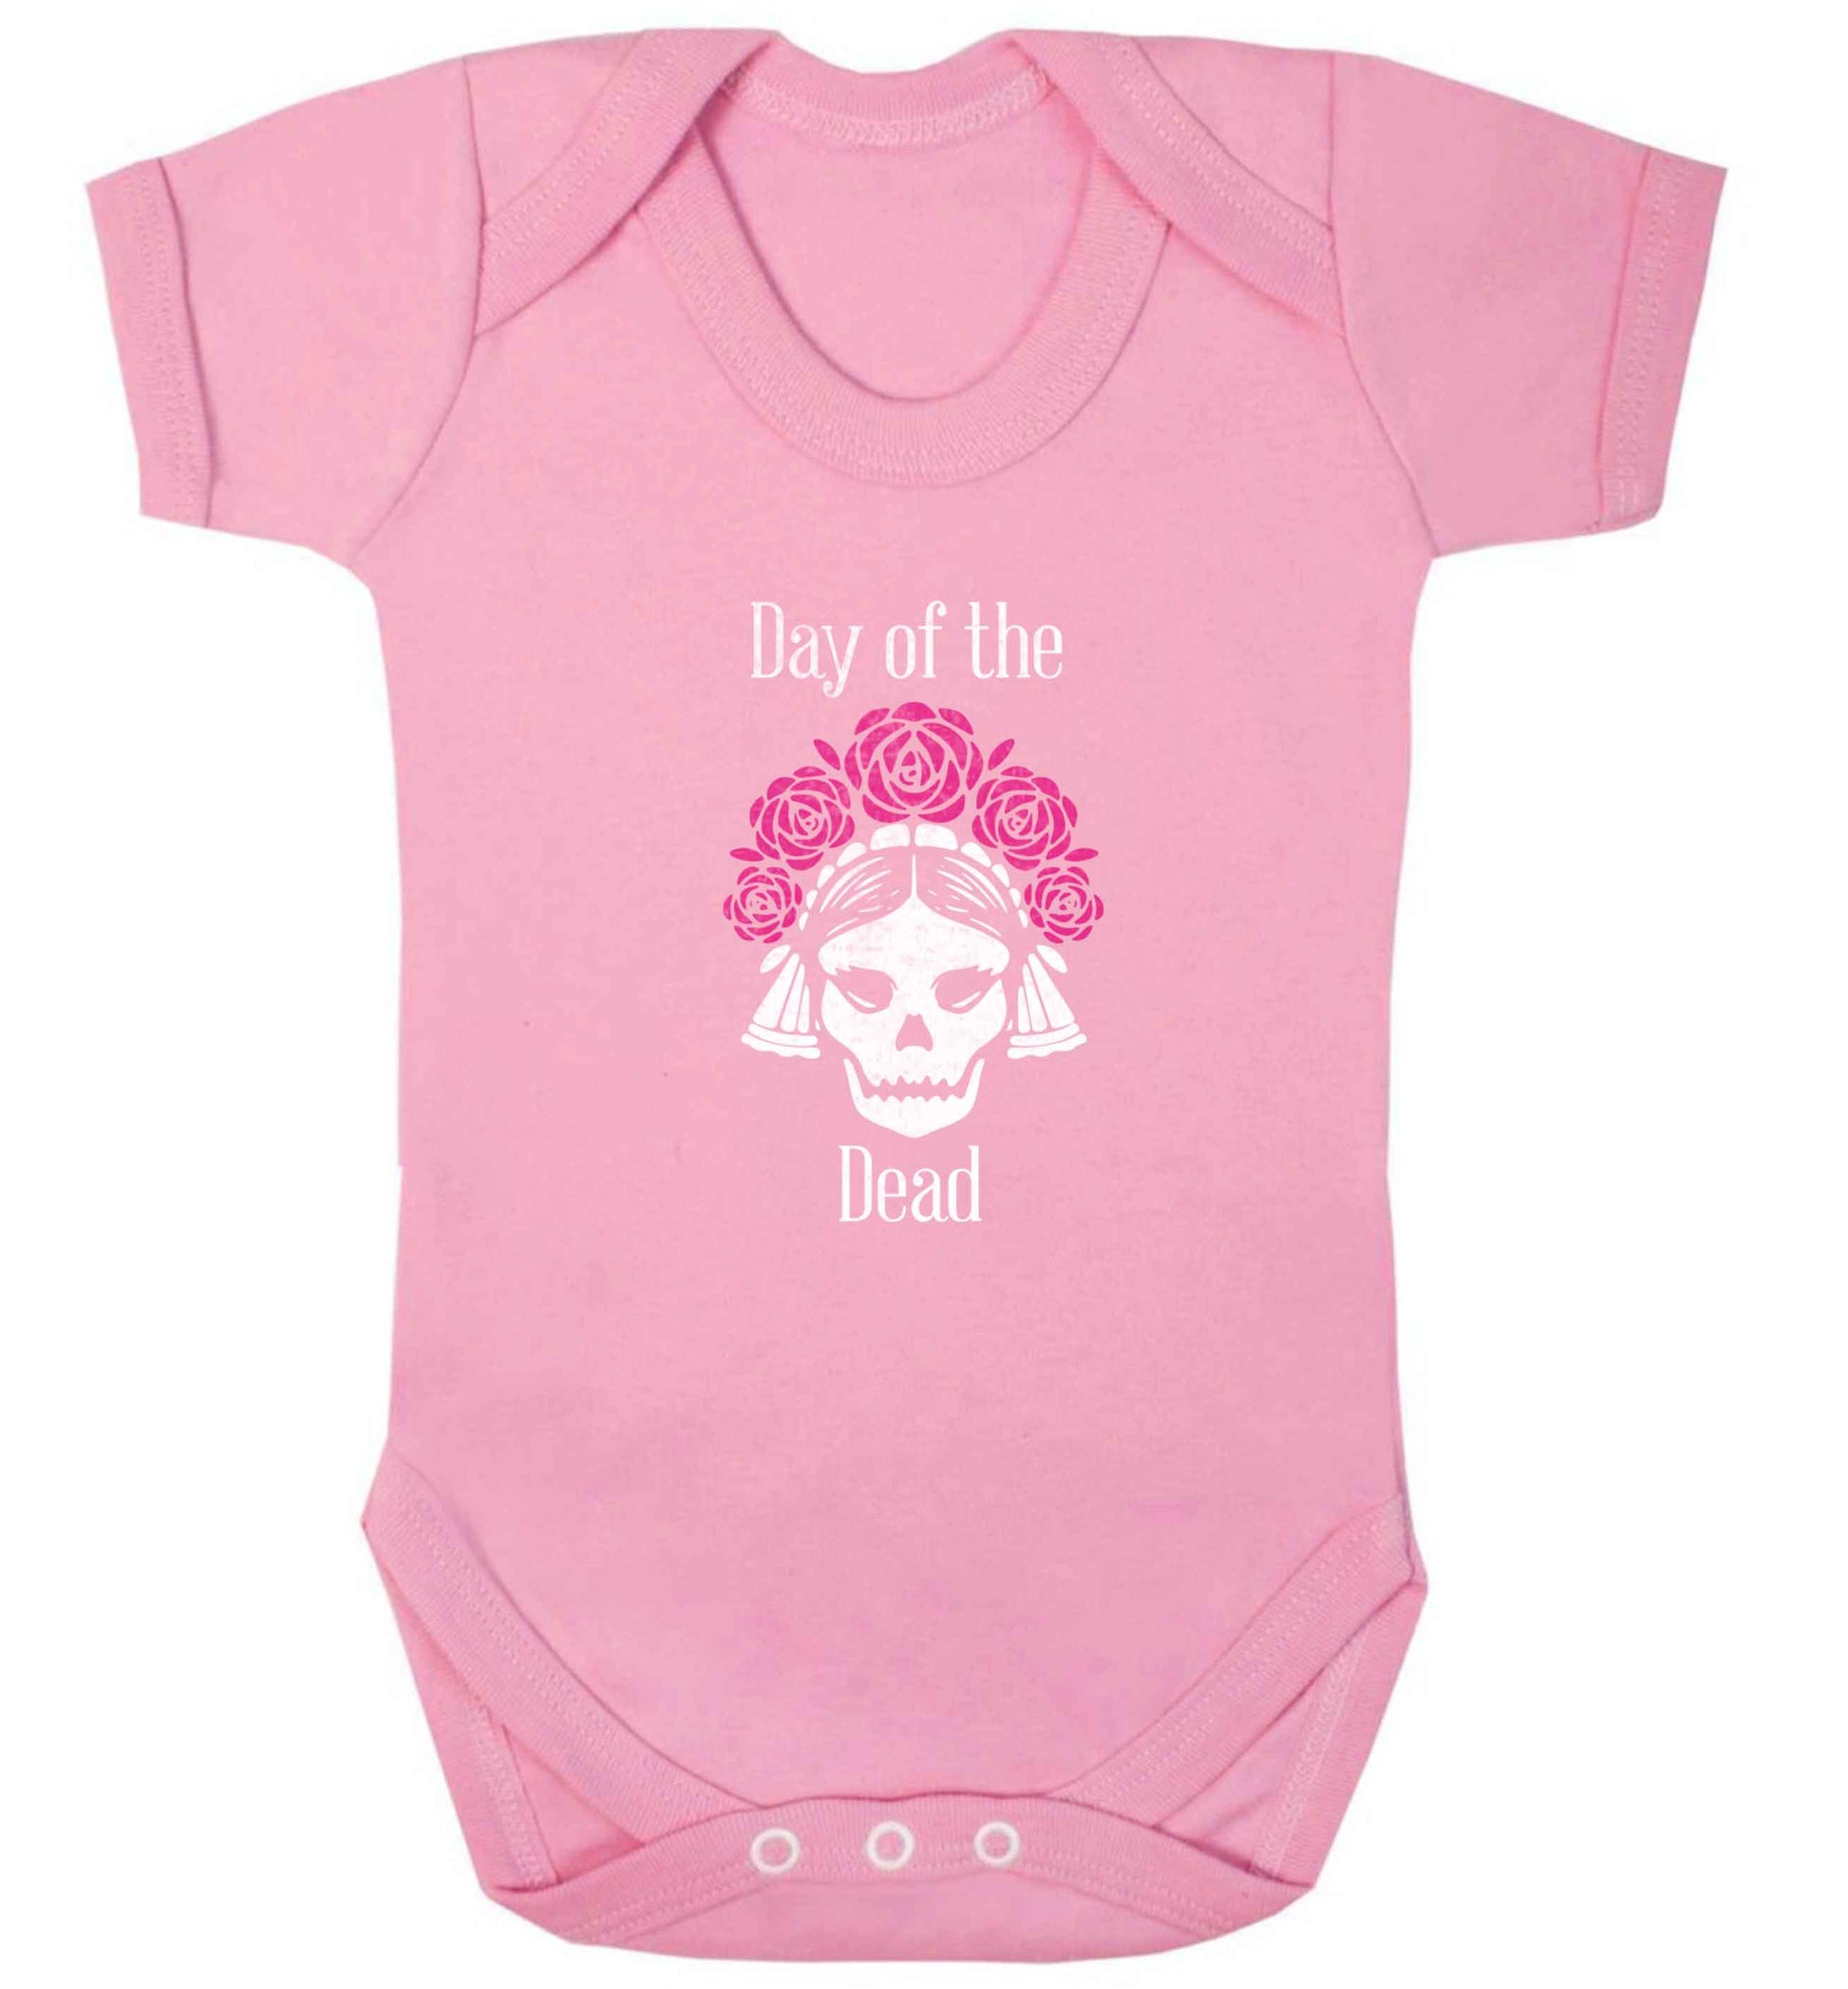 Day of the dead baby vest pale pink 18-24 months